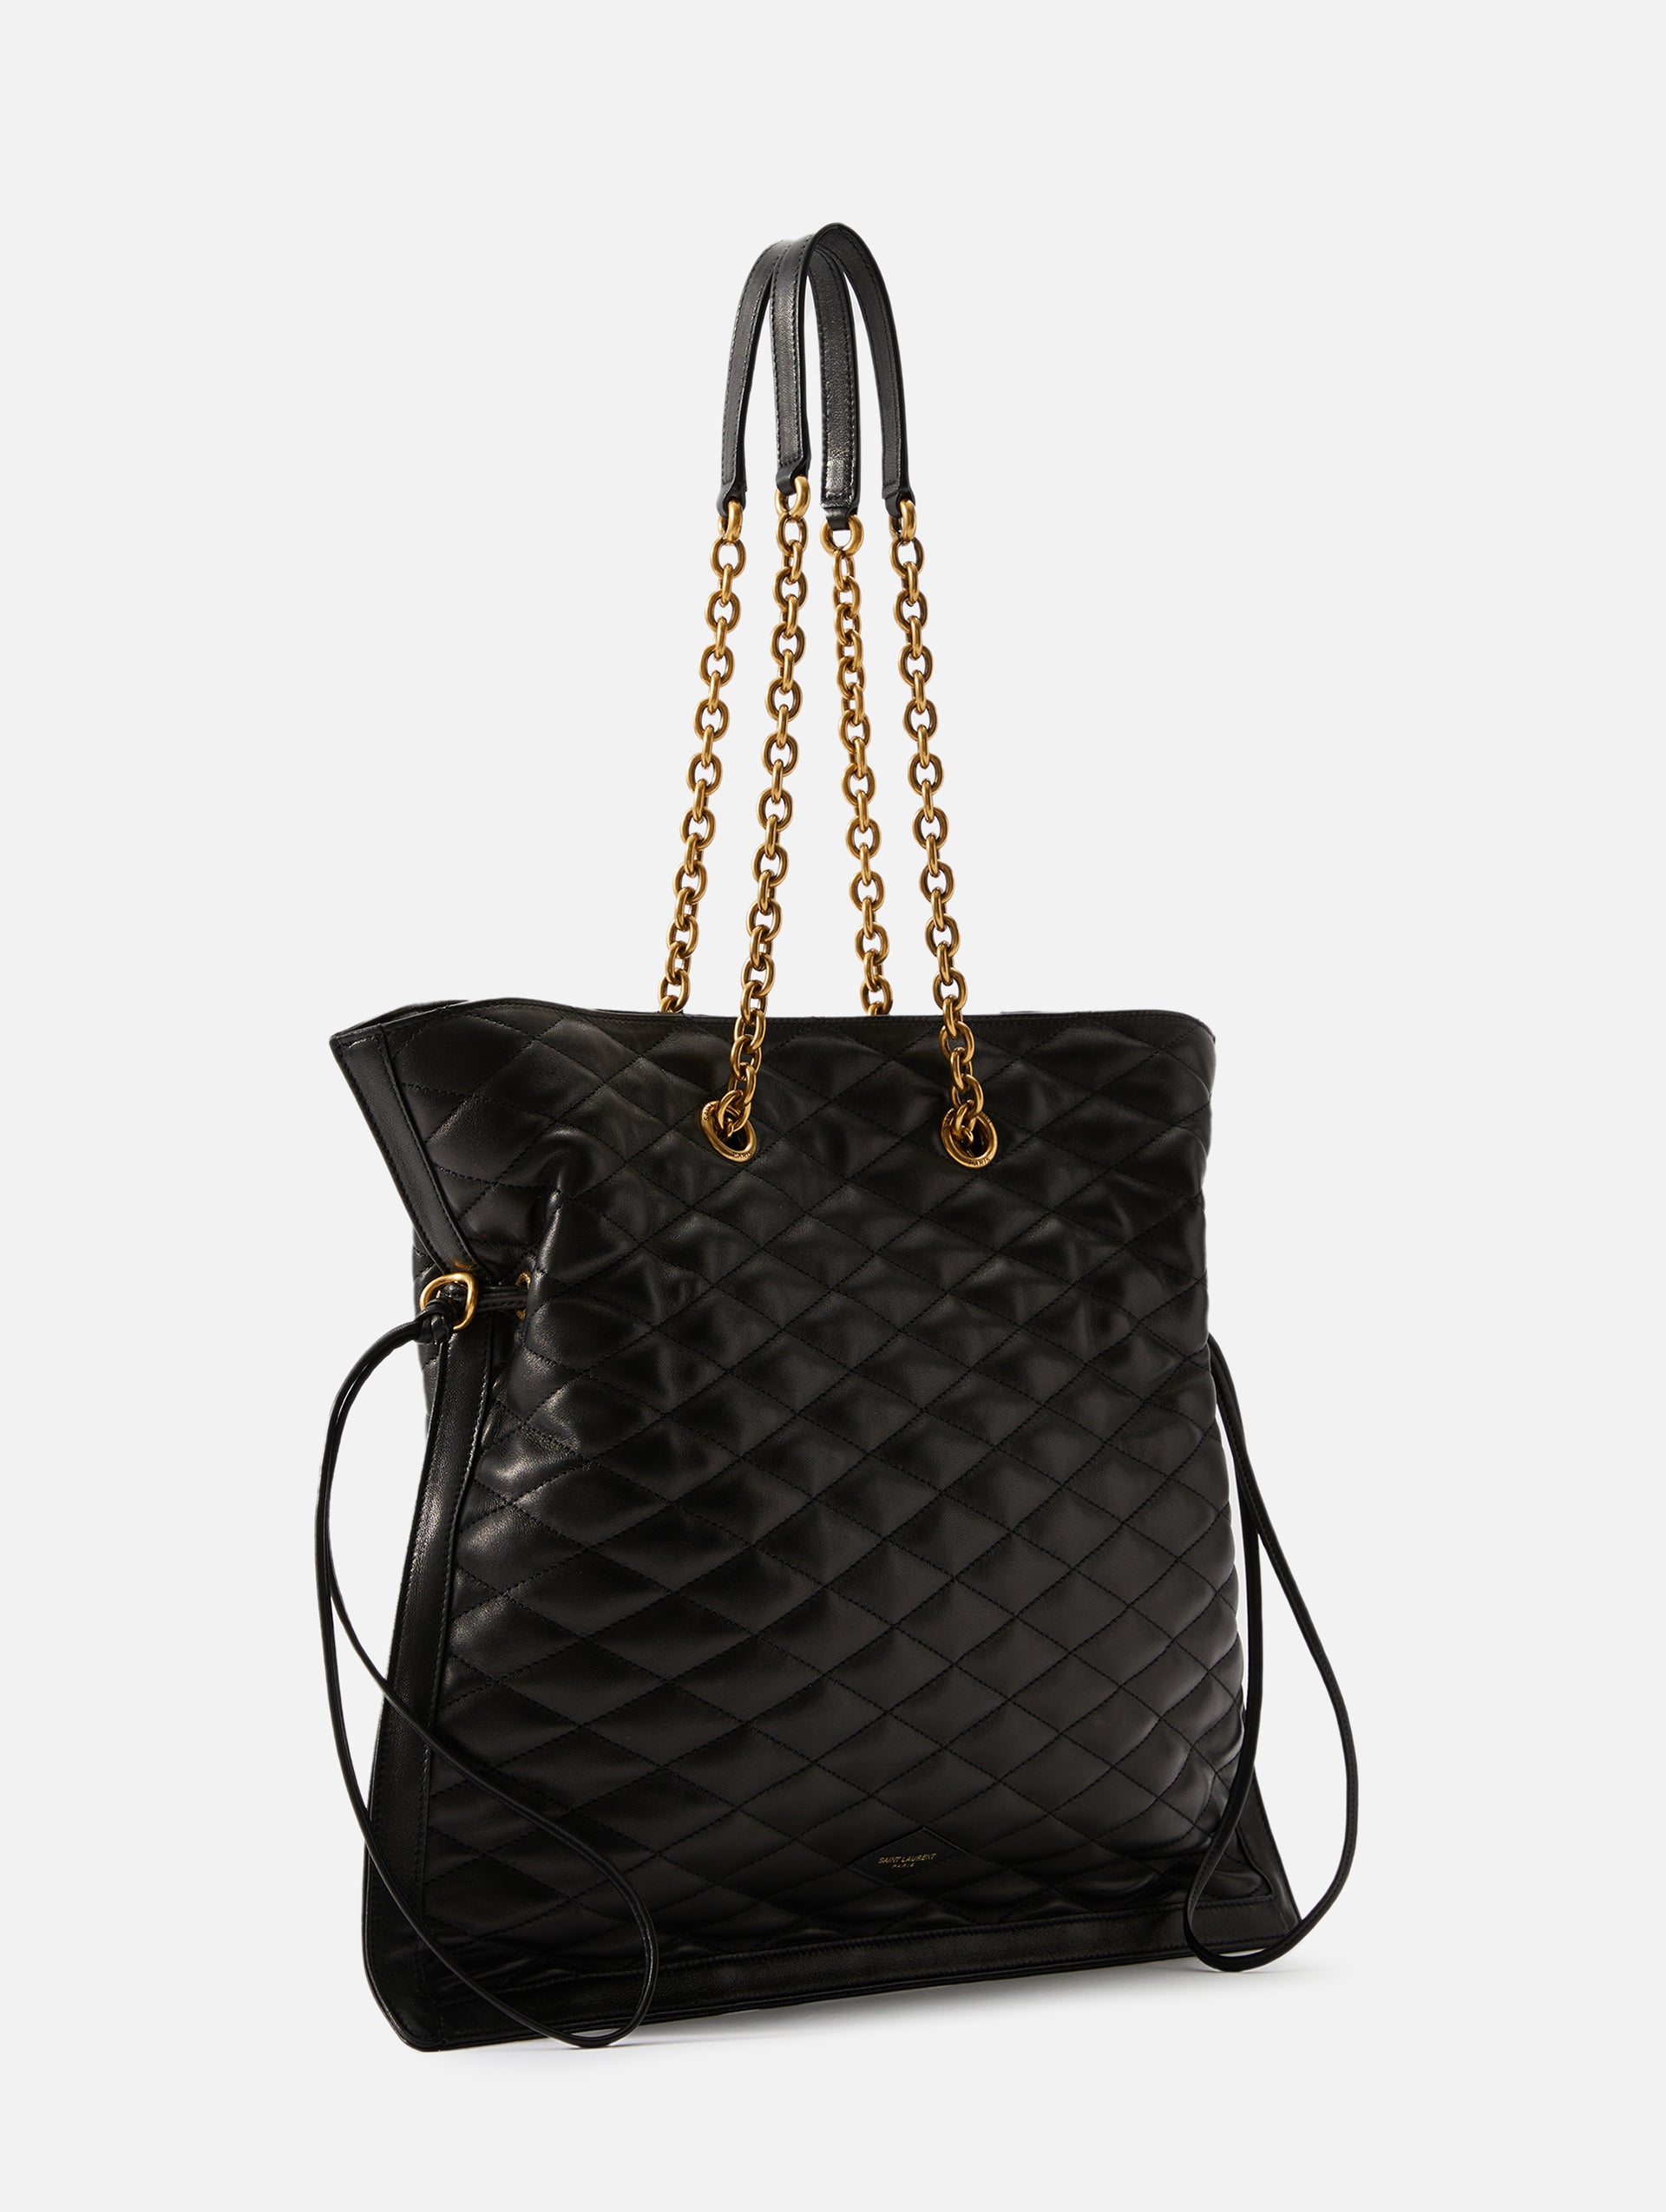 Saint Laurent Micro Gaby Quilted Leather Shoulder Bag in Black | Lyst